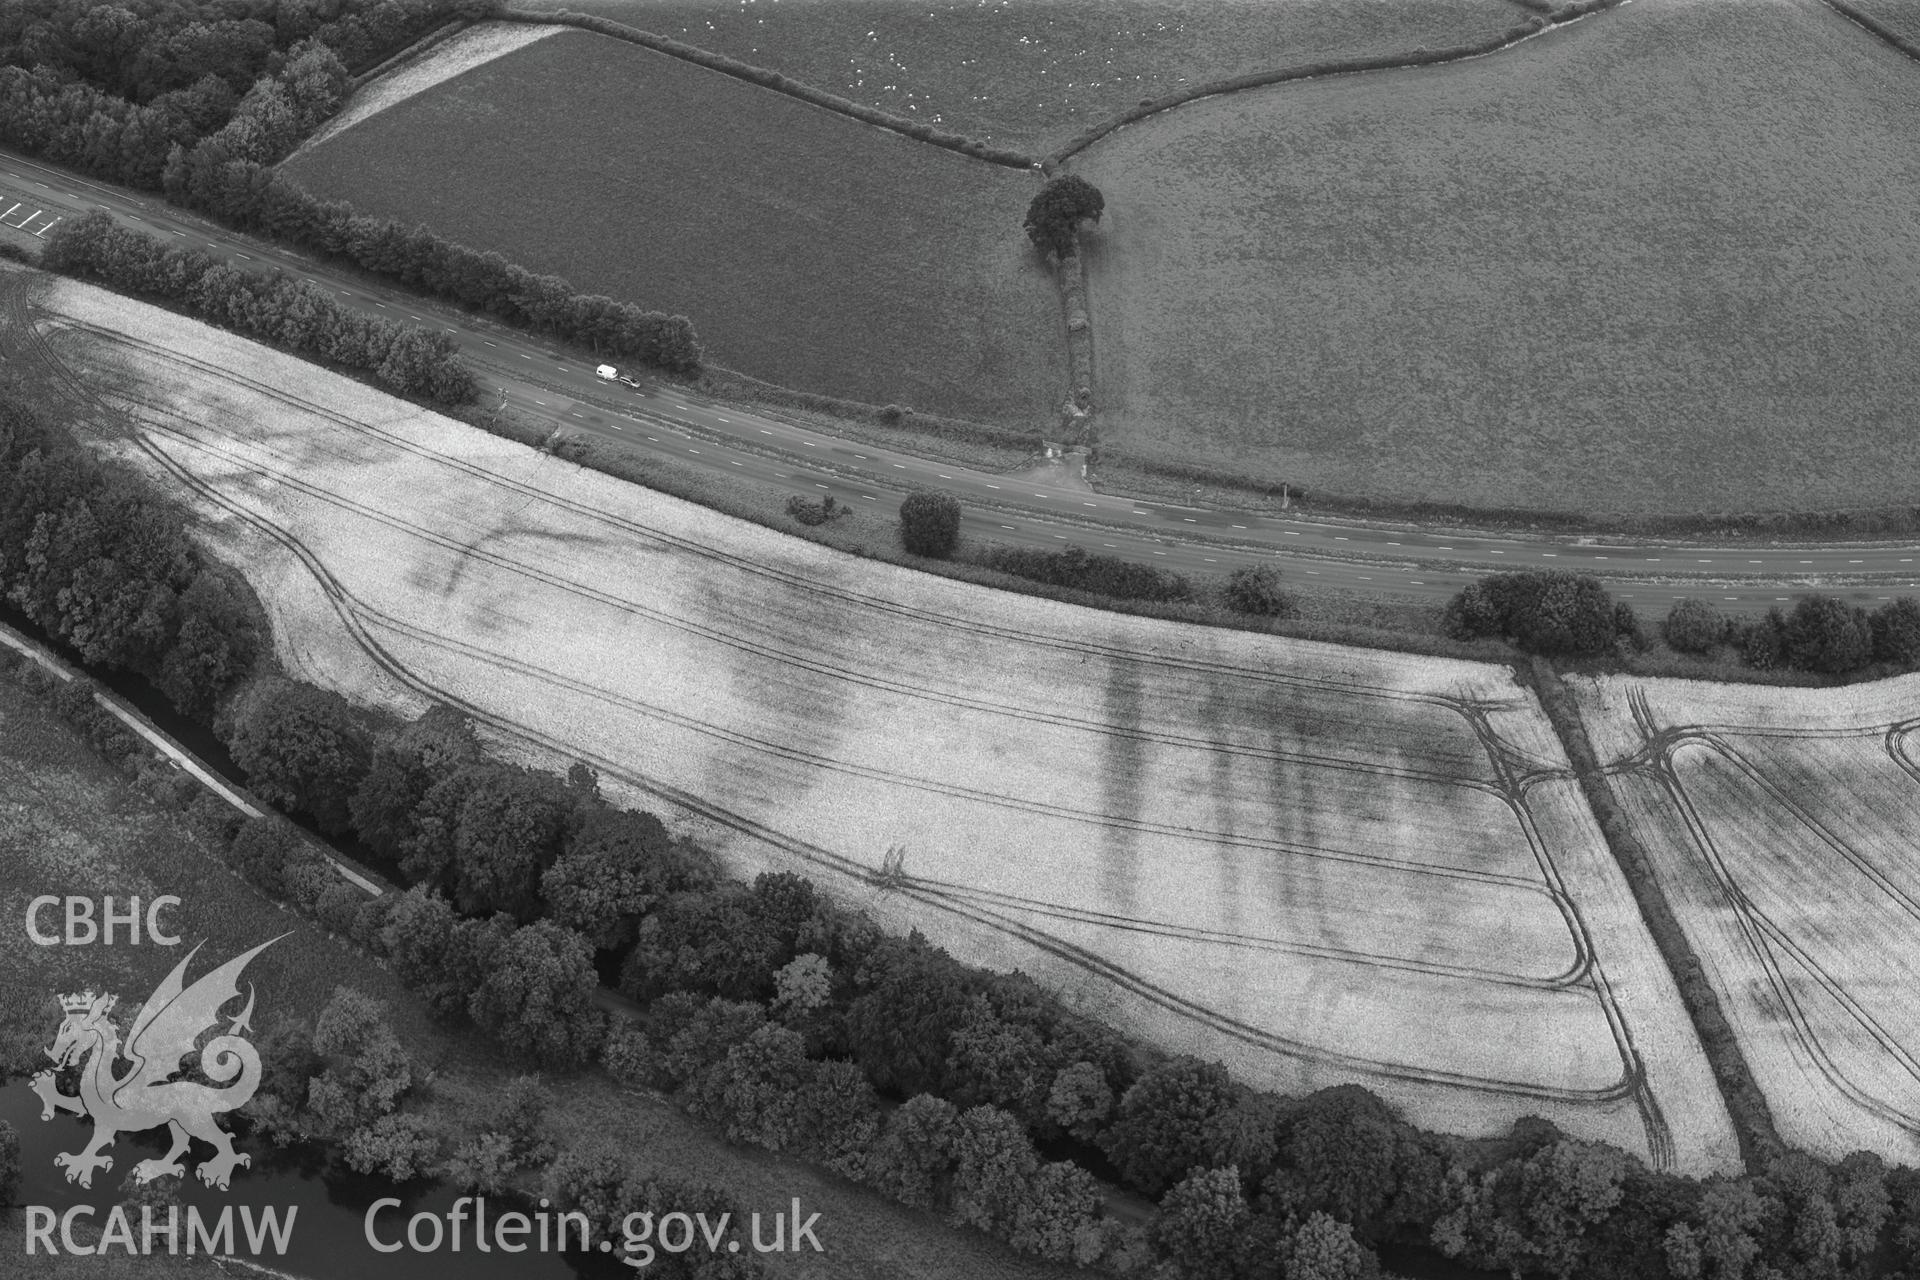 Cefn-brynich Roman fort, detailed view (black and white) of cropmarks of Roman fort ditches from south, taken by RCAHMW 1st August 2013.